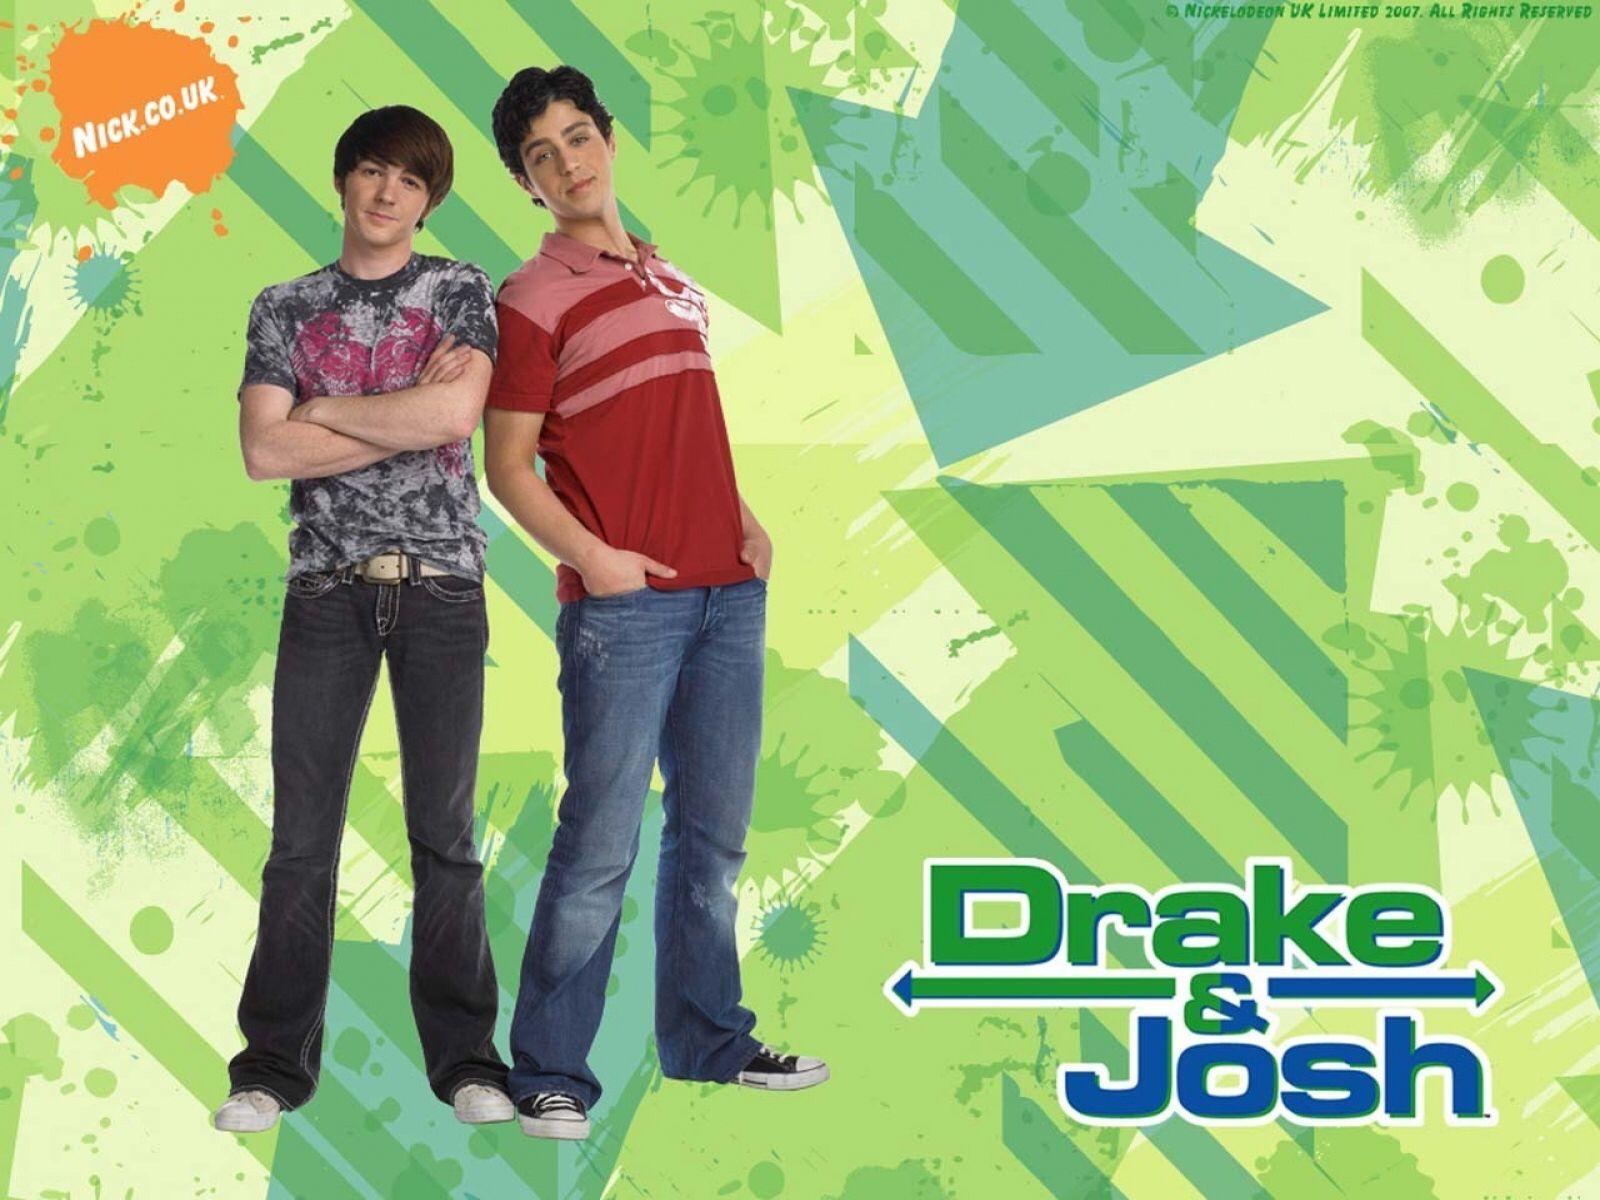 How Well Do You Remember The Lyrics To The "Drake And Josh" Theme...